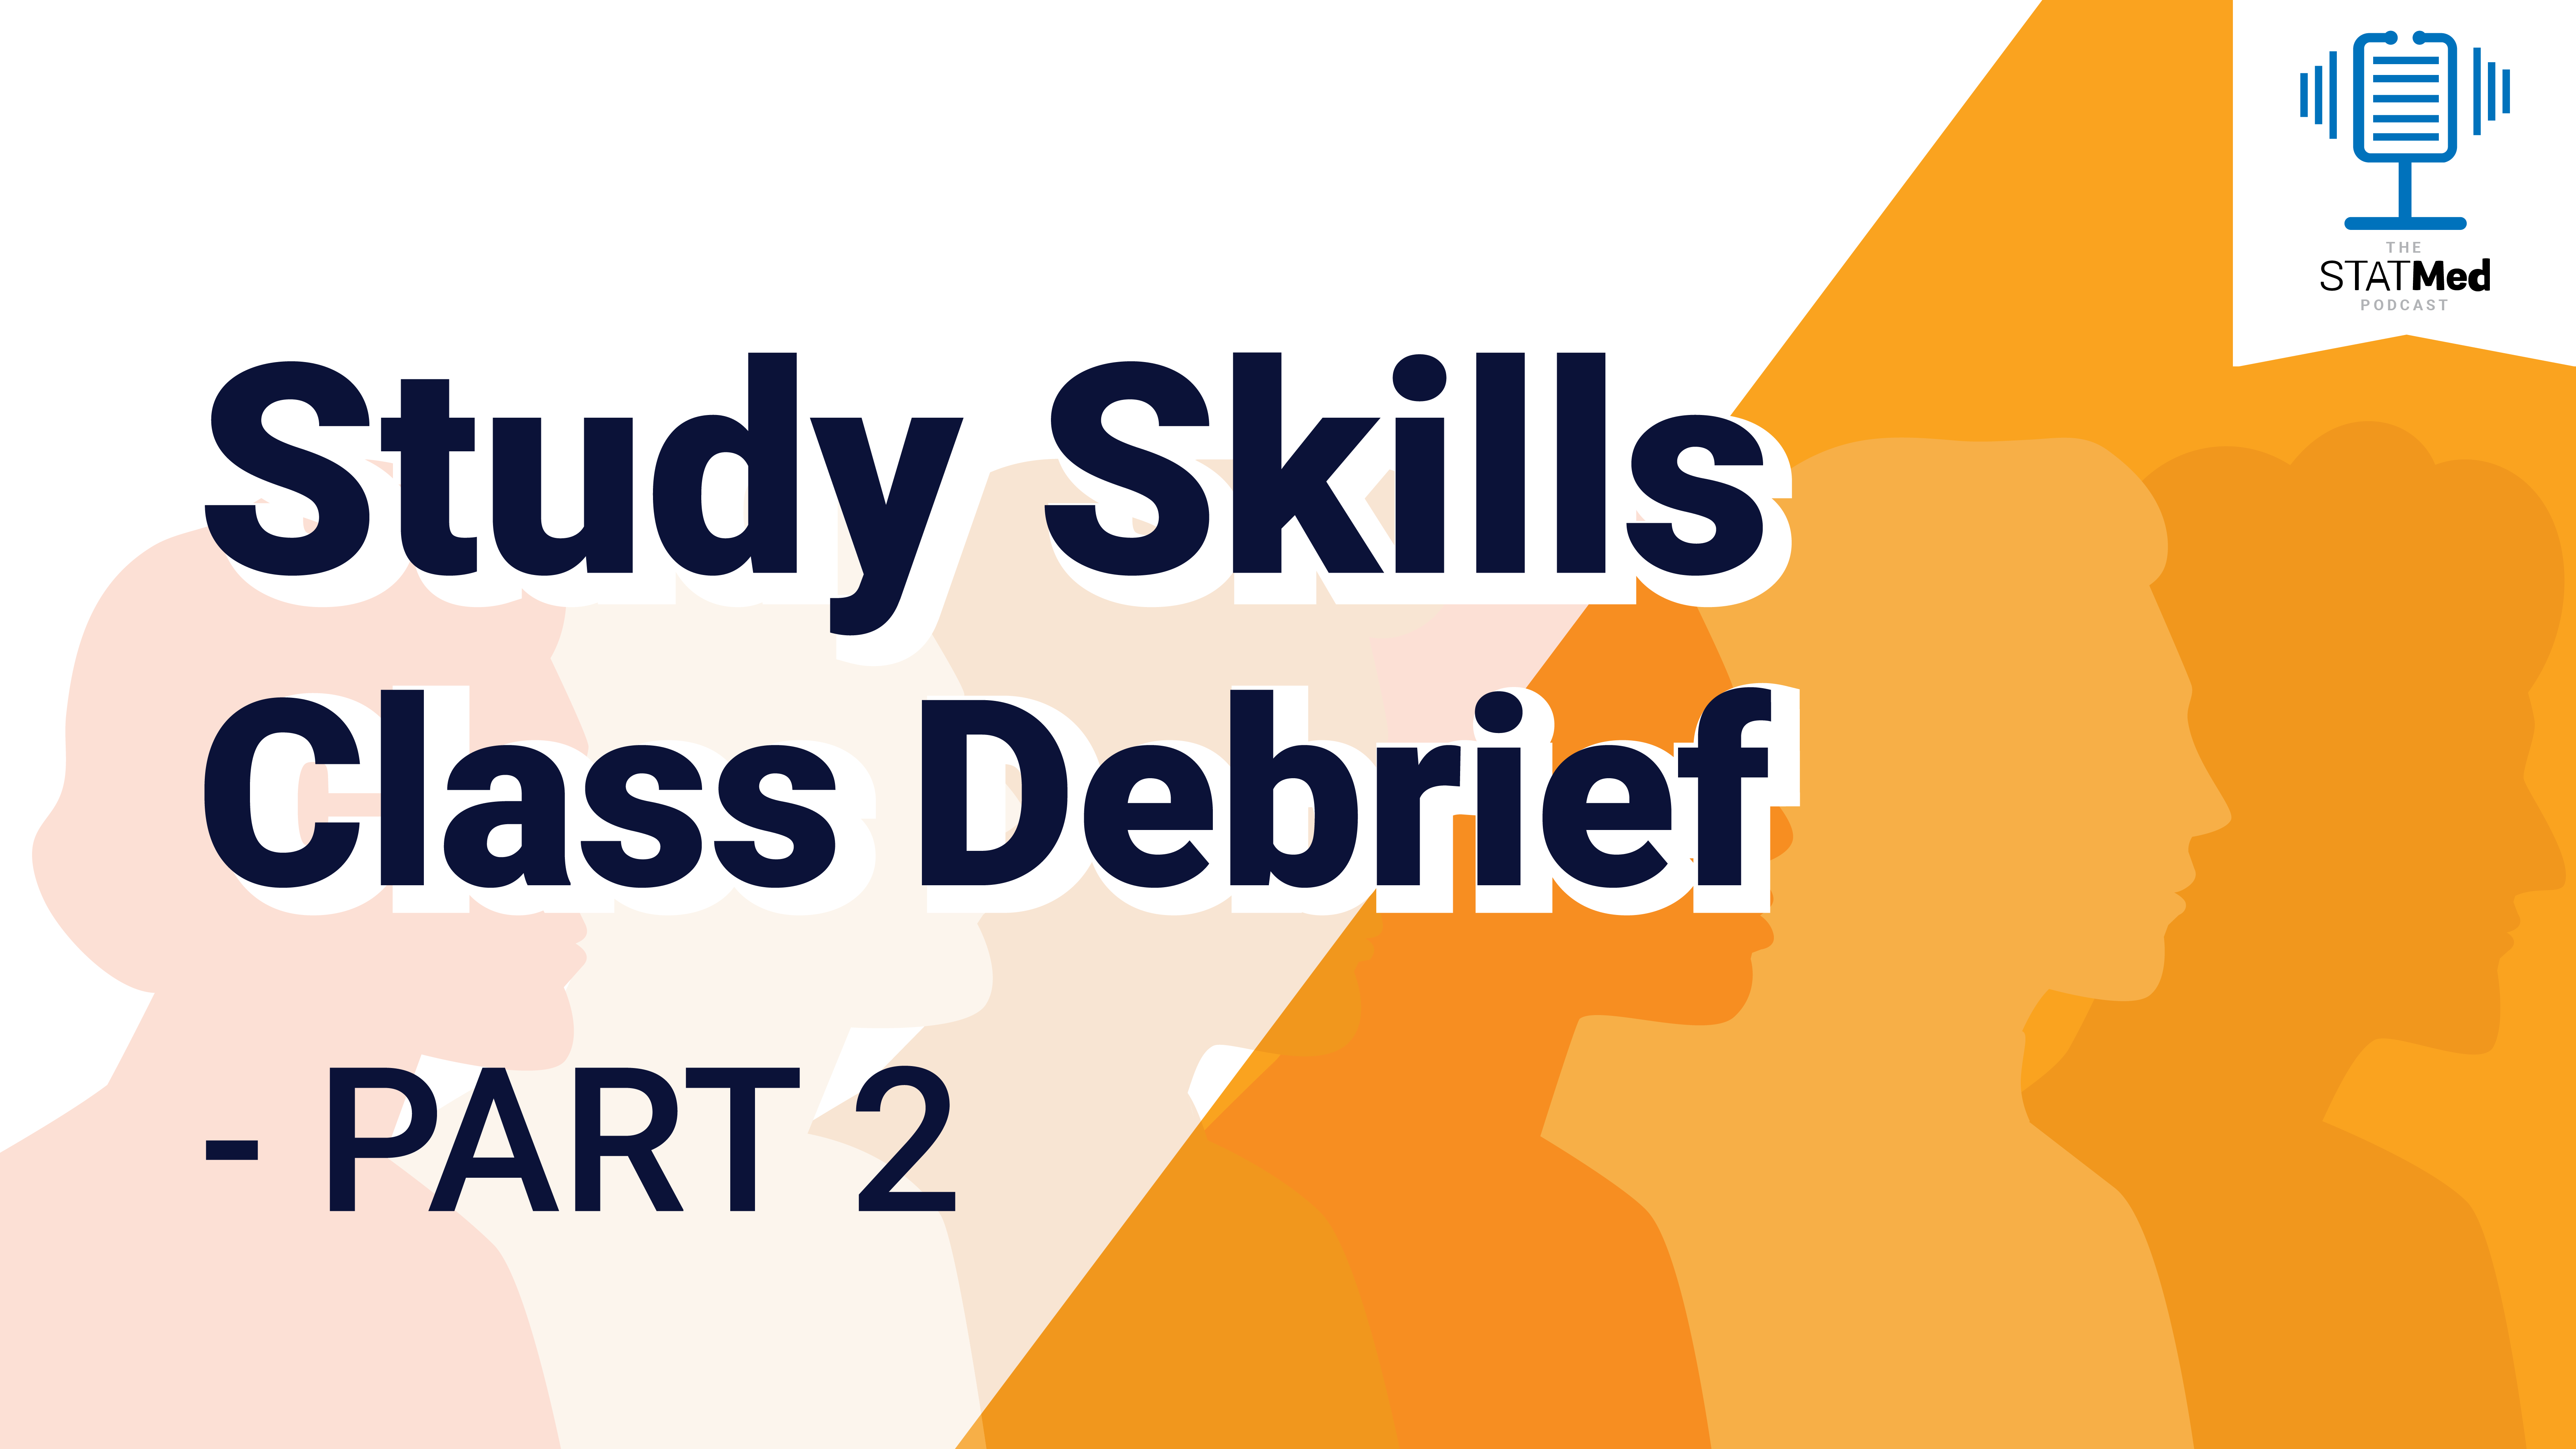 Featured image for “On the STATMed Podcast: Study Skills Class Debrief Part 2”